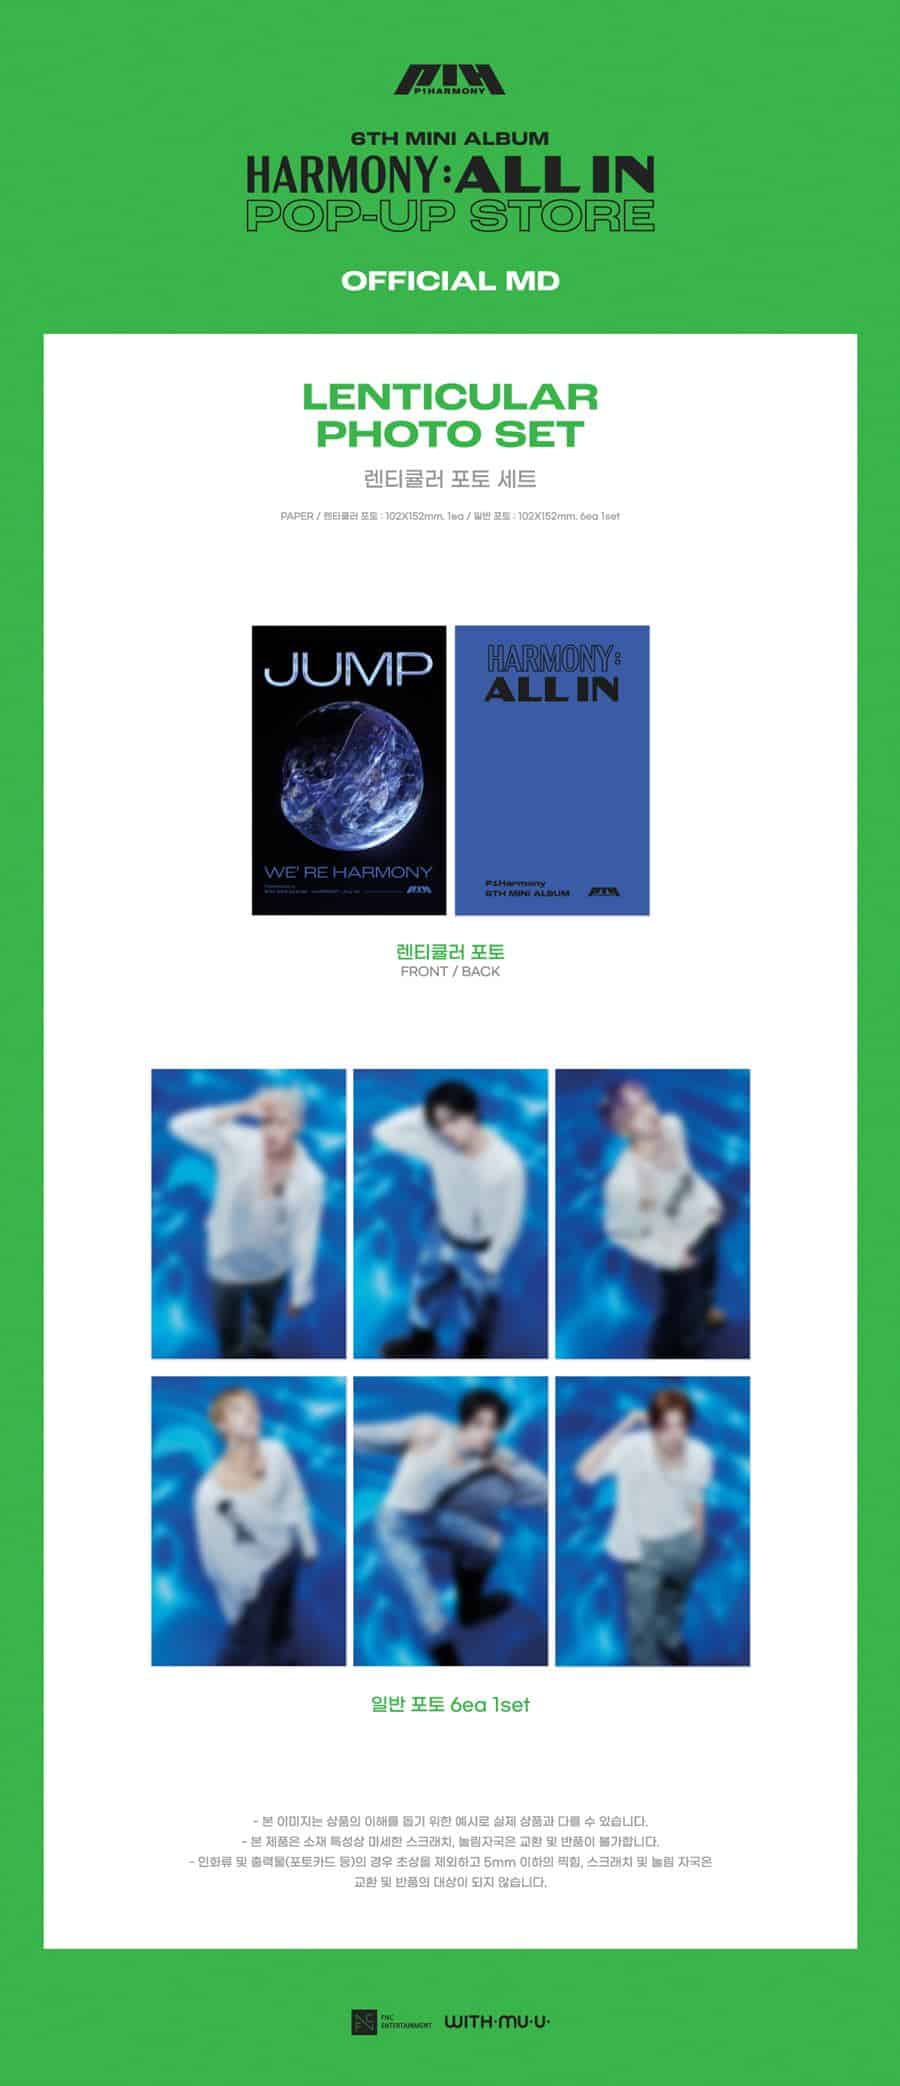 p-one-harmony-lenticular-photo-set-pop-store-official-md-harmony-all-in-wholesales